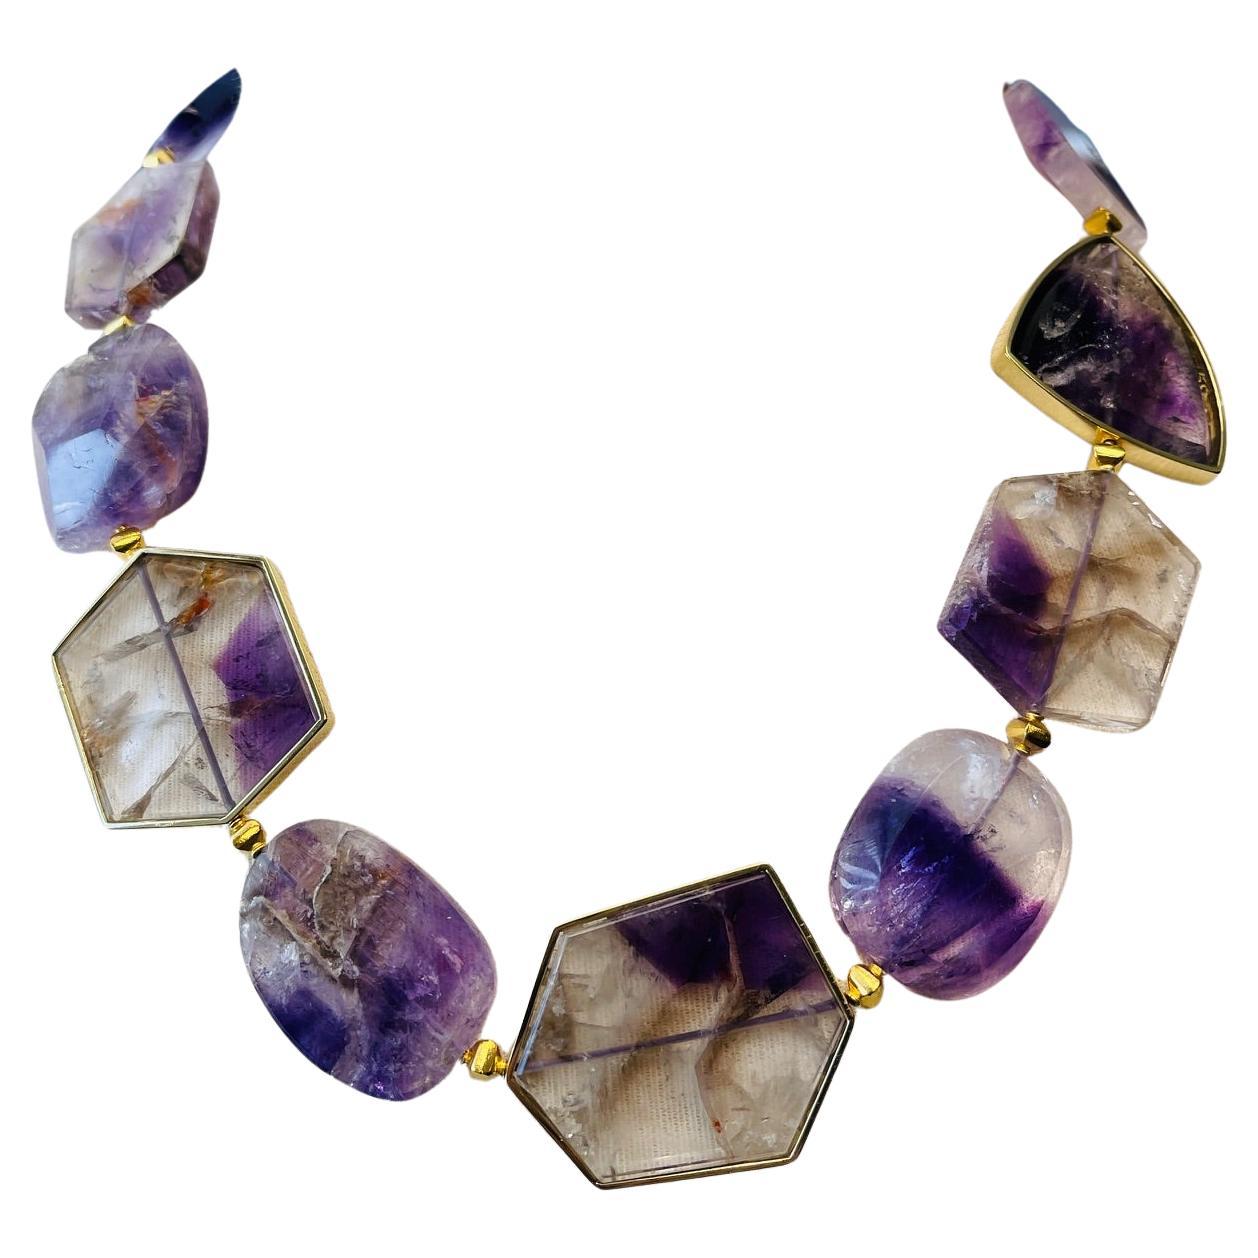  Amethyst Slice Bead Necklace, 555 Carats Total with 18K Yellow Gold Bezels For Sale